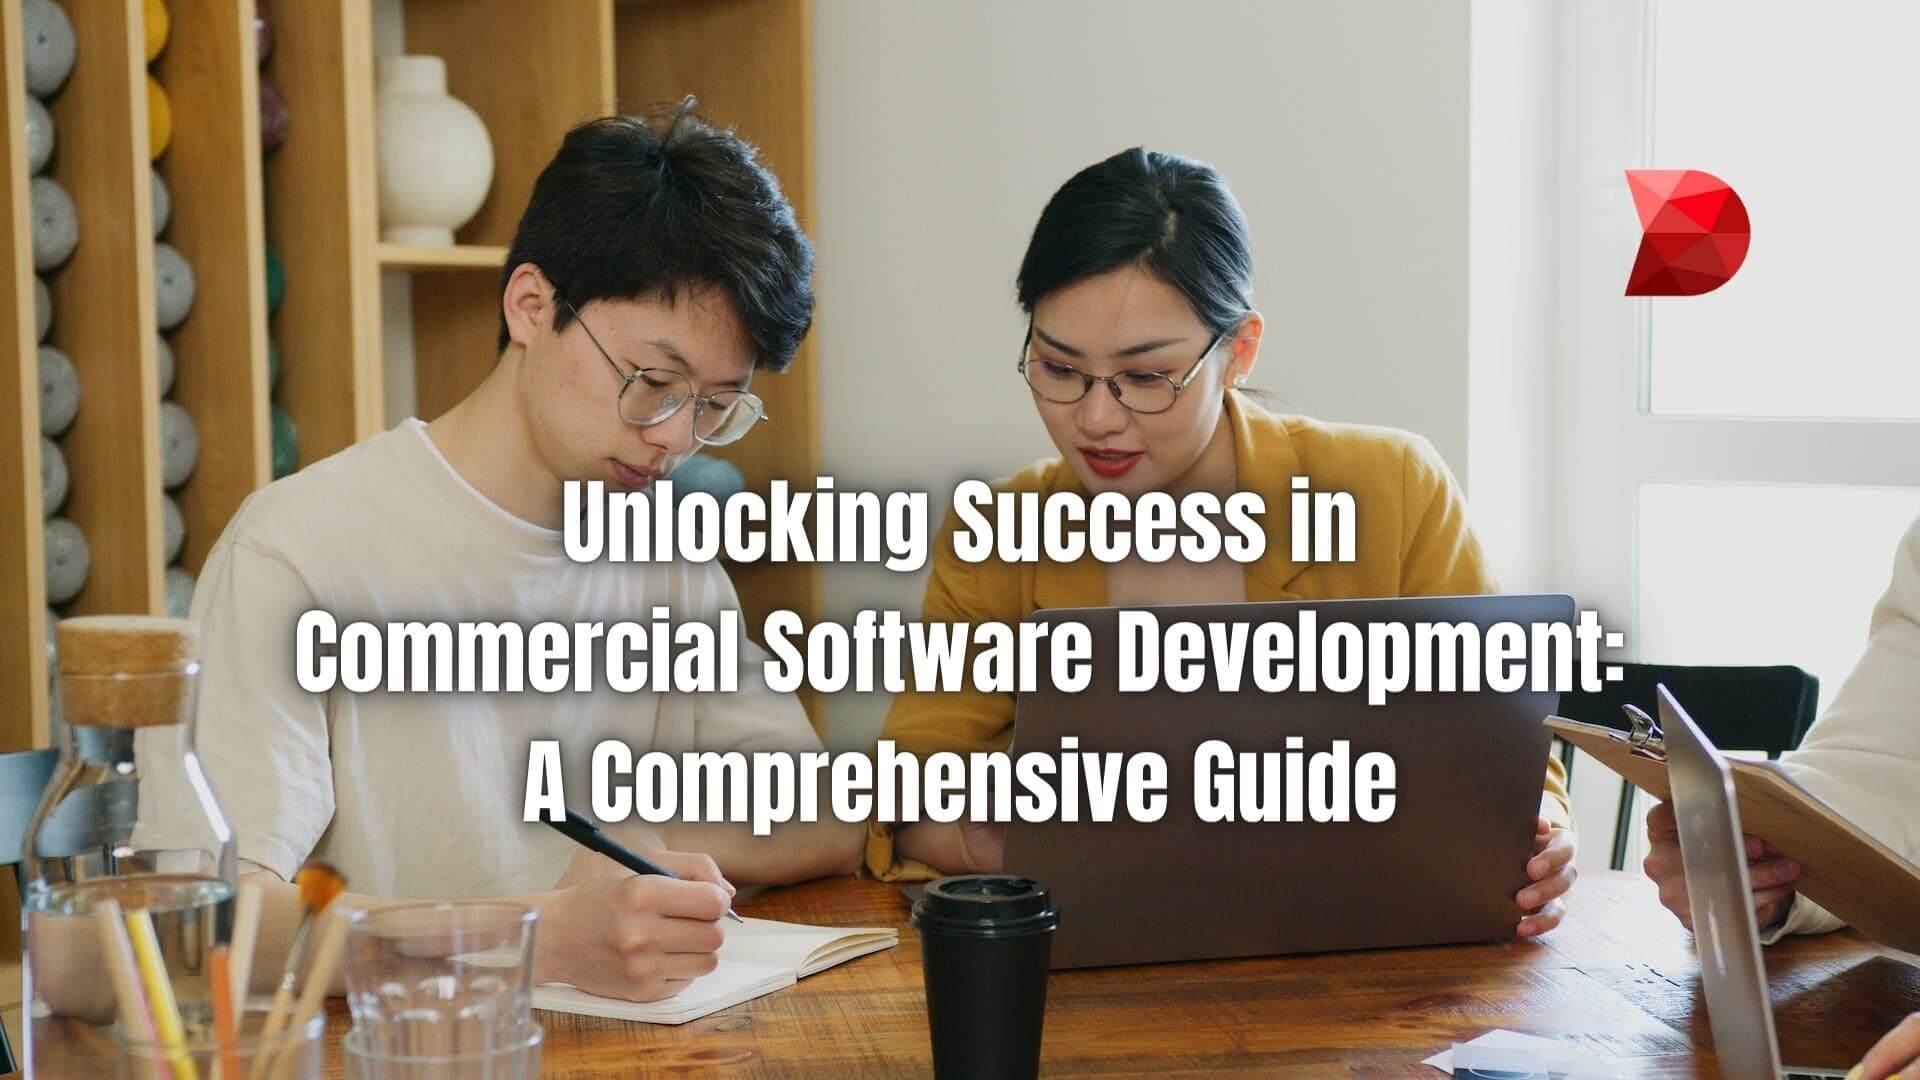 Navigate the world of commercial software development effectively. Click here to learn essential strategies for unlocking success now!